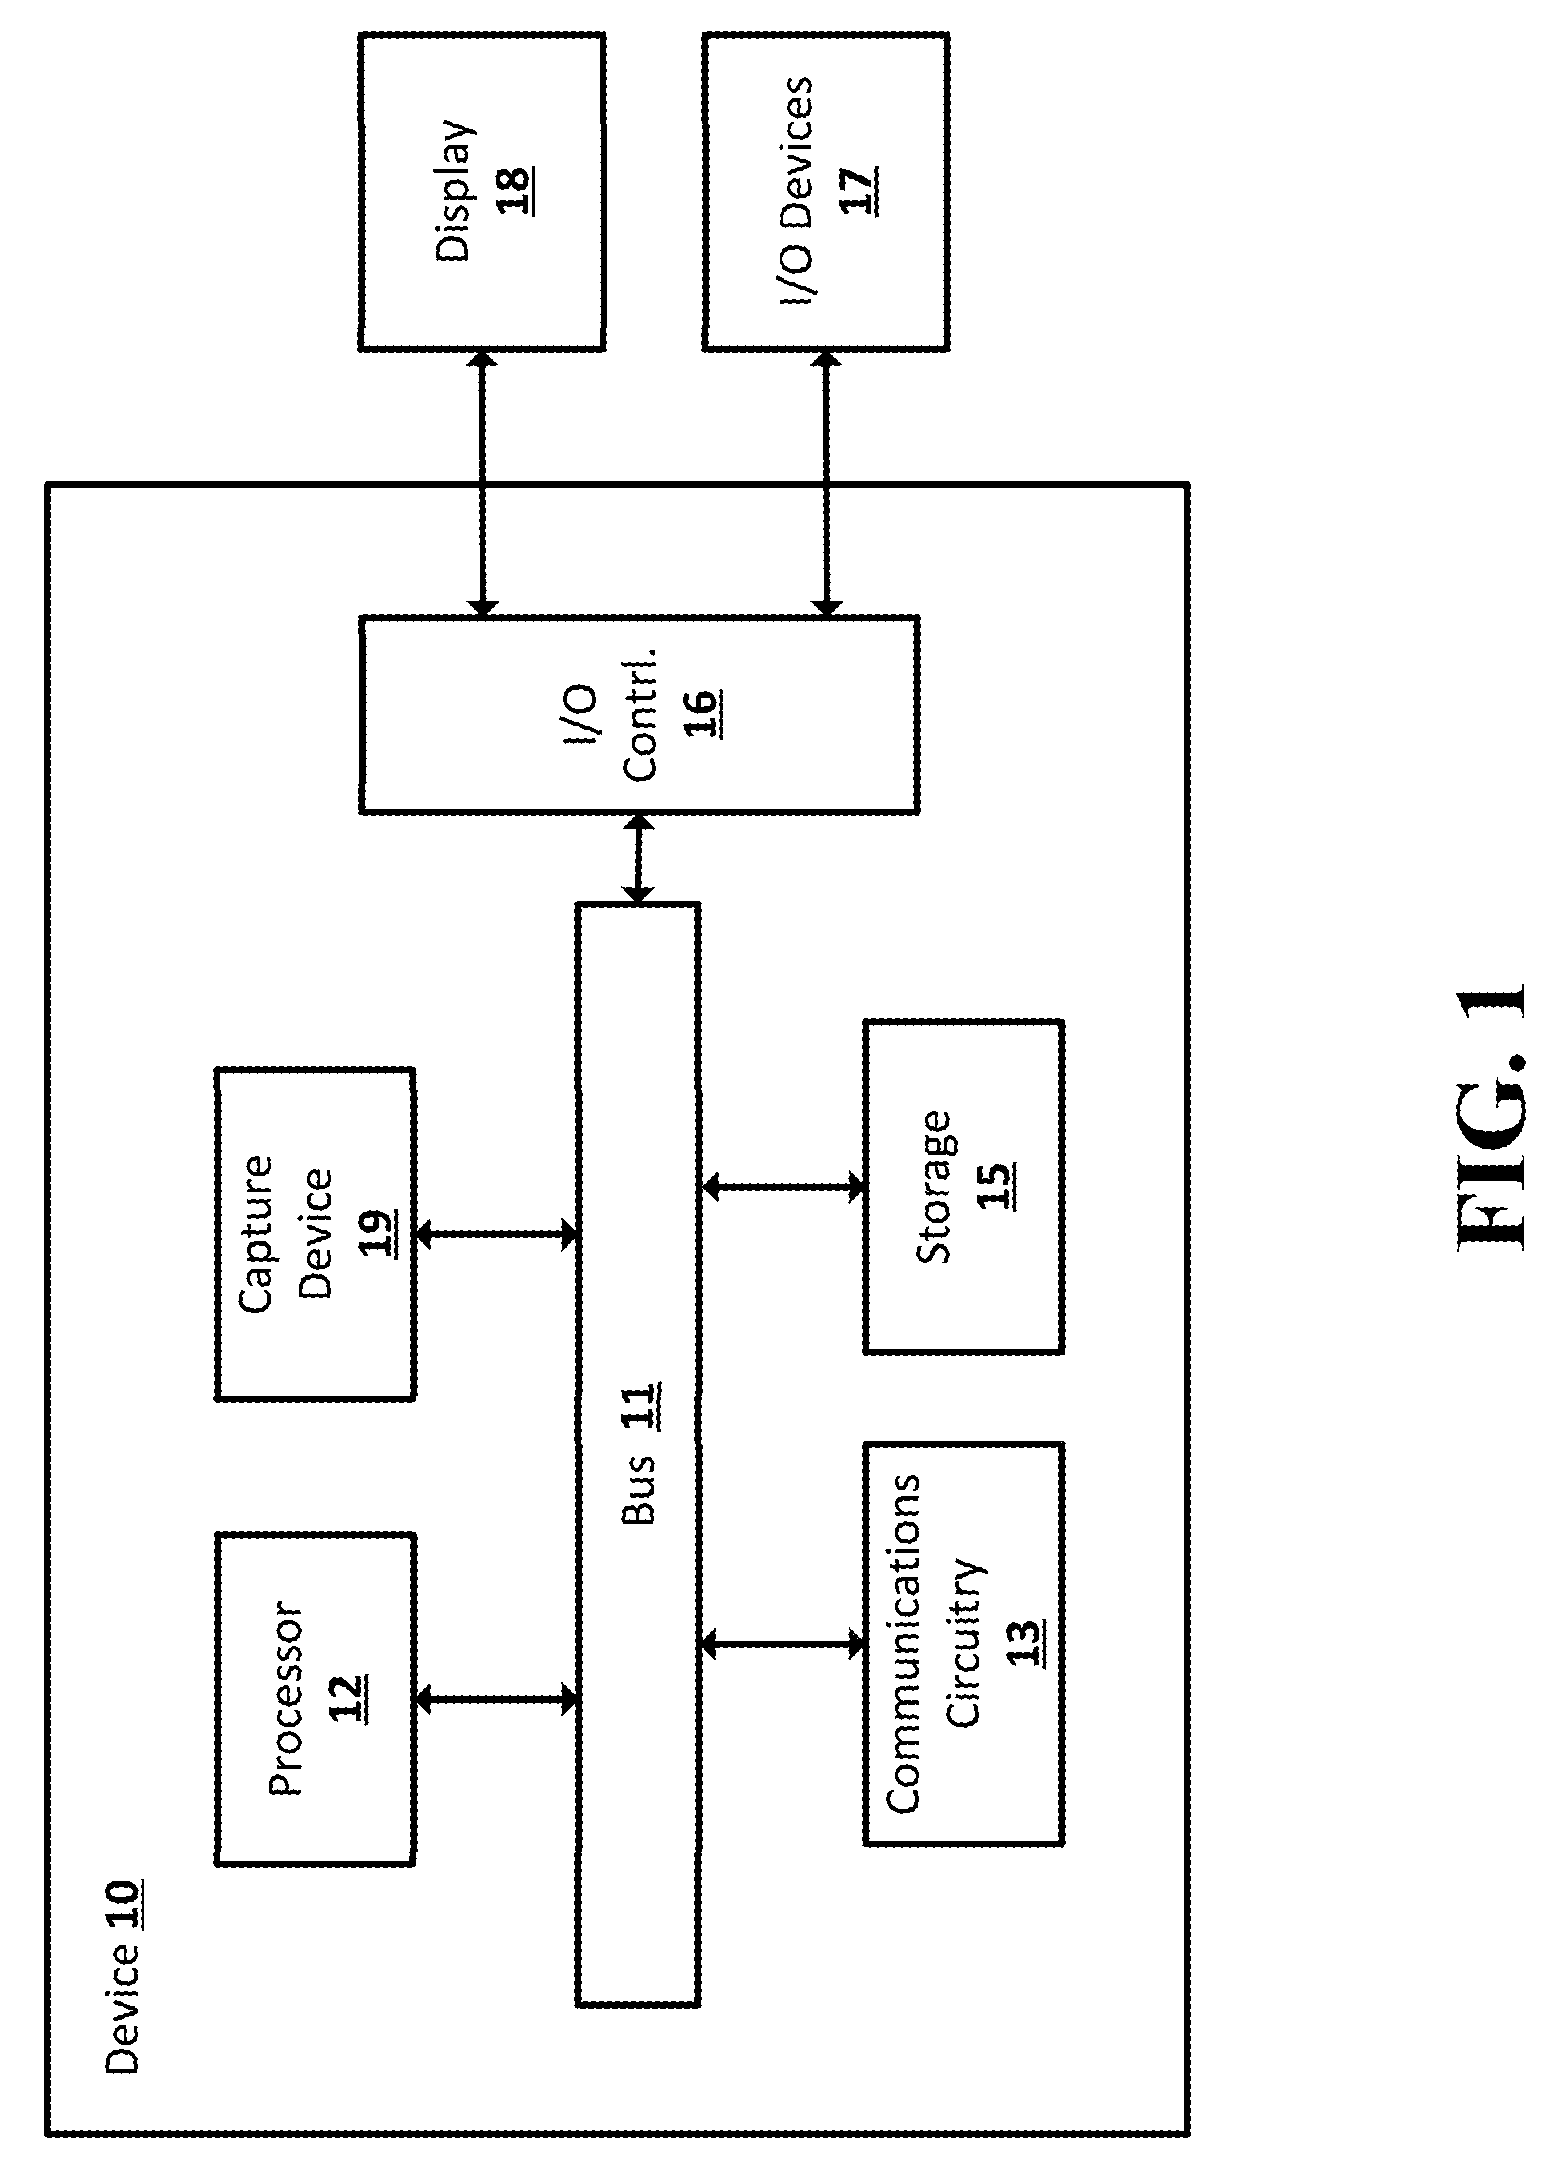 Device interaction with spatially aware gestures